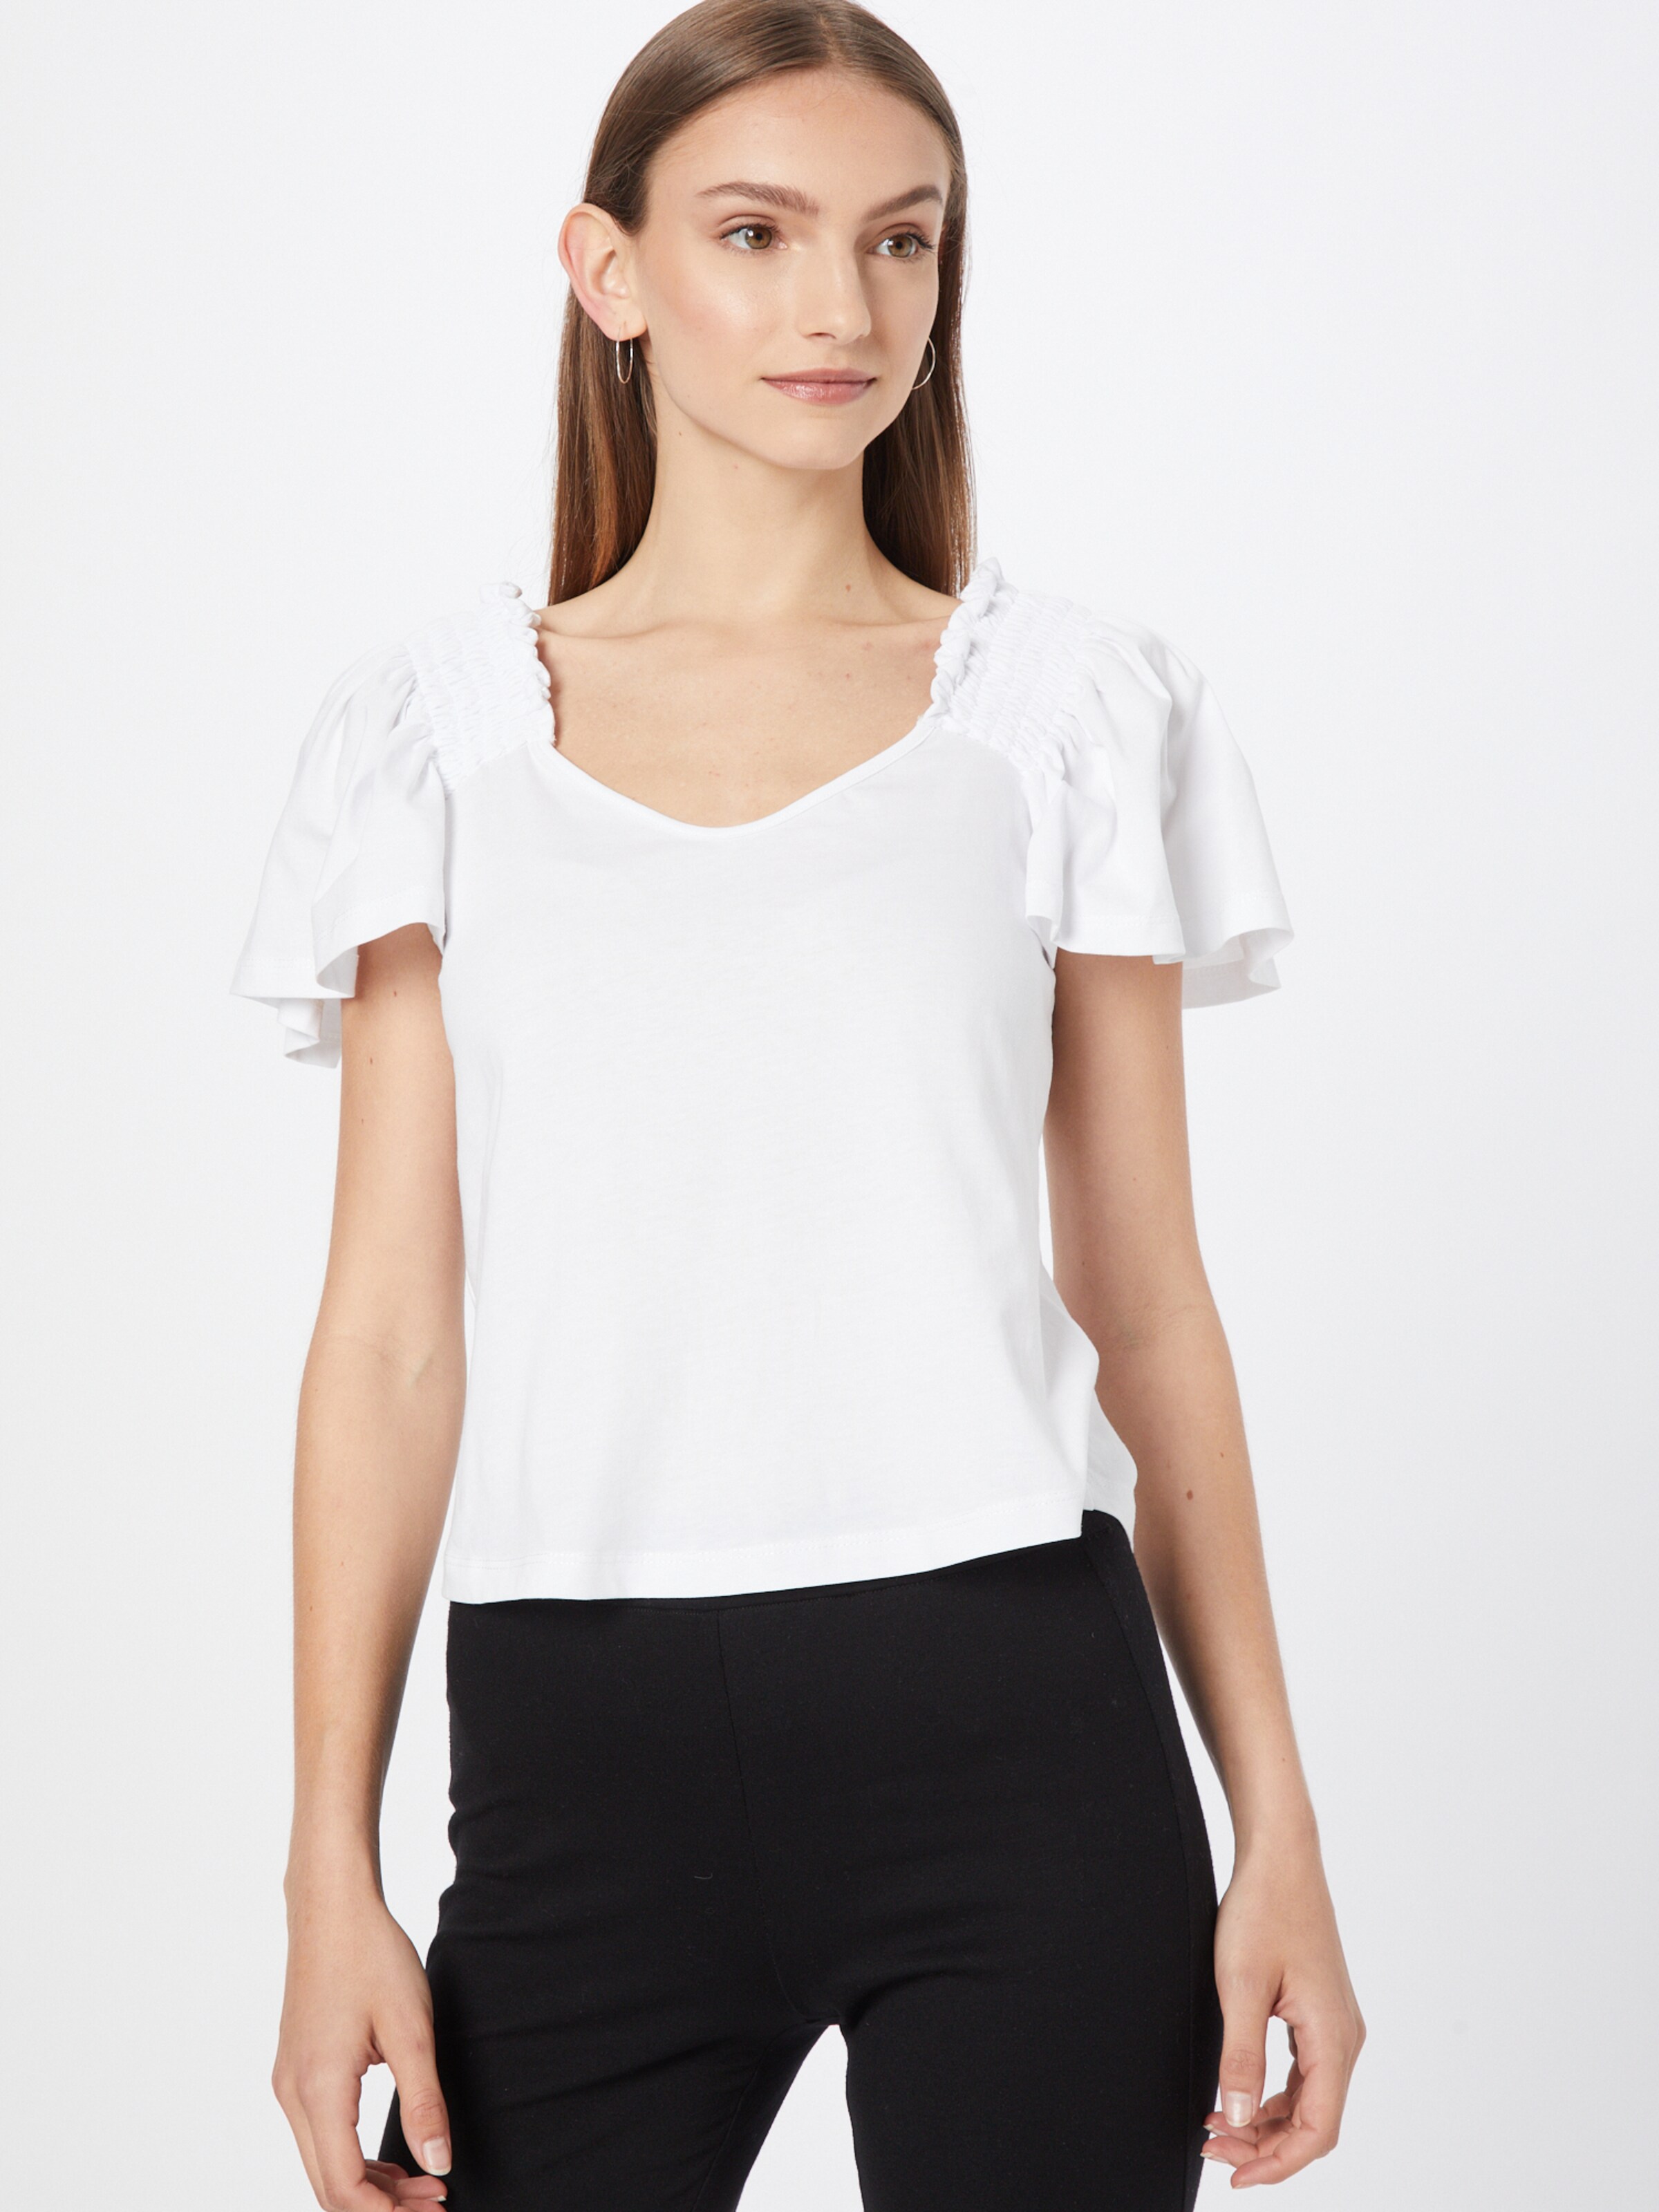 Frauen Shirts & Tops IMPERIAL T-Shirt in Offwhite - IL40433